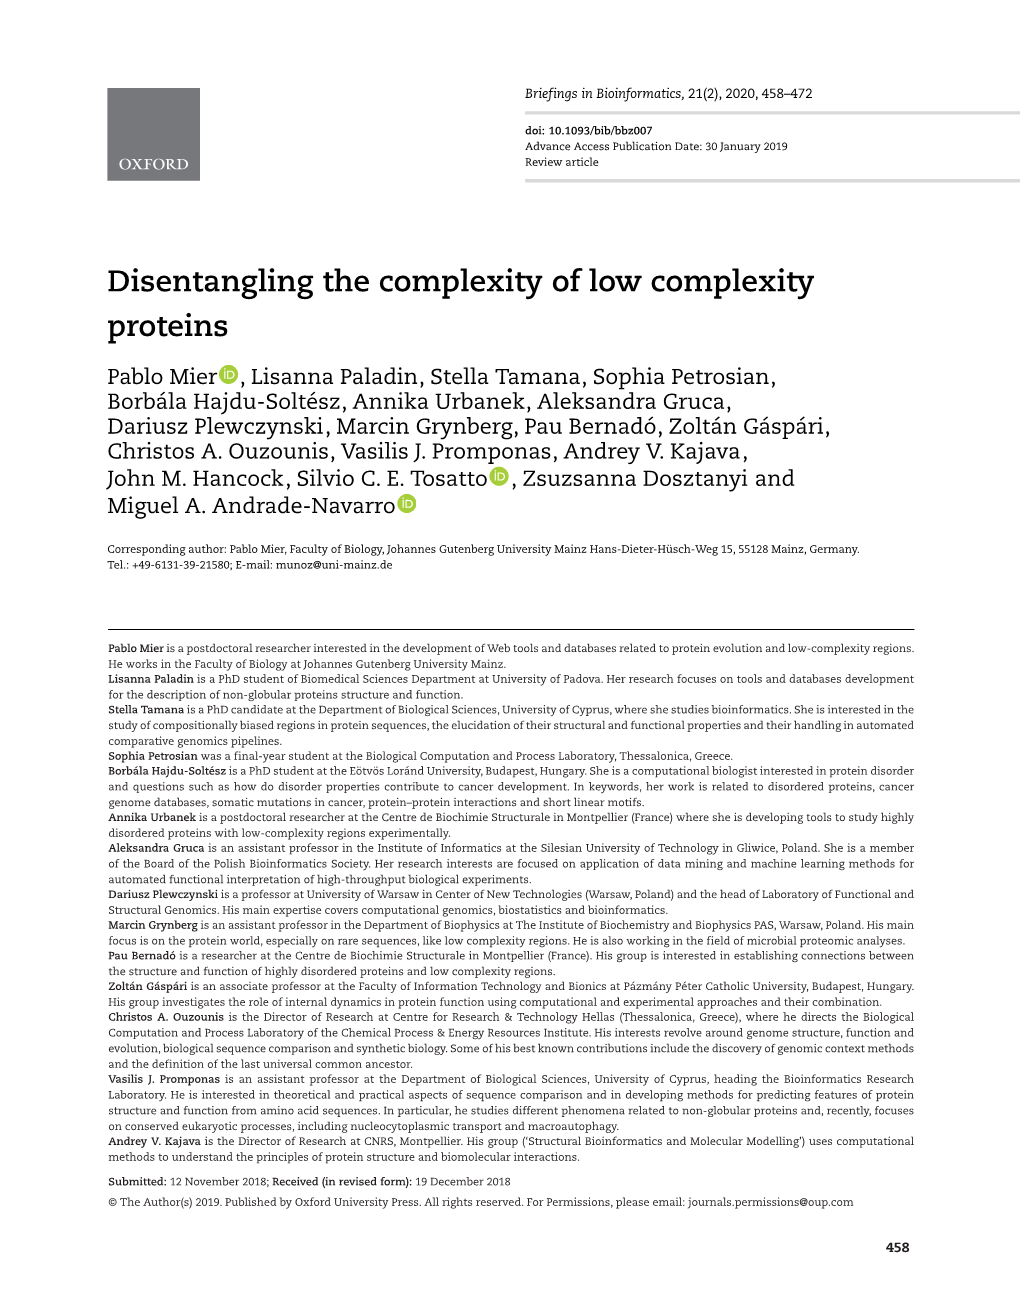 Disentangling the Complexity of Low Complexity Proteins